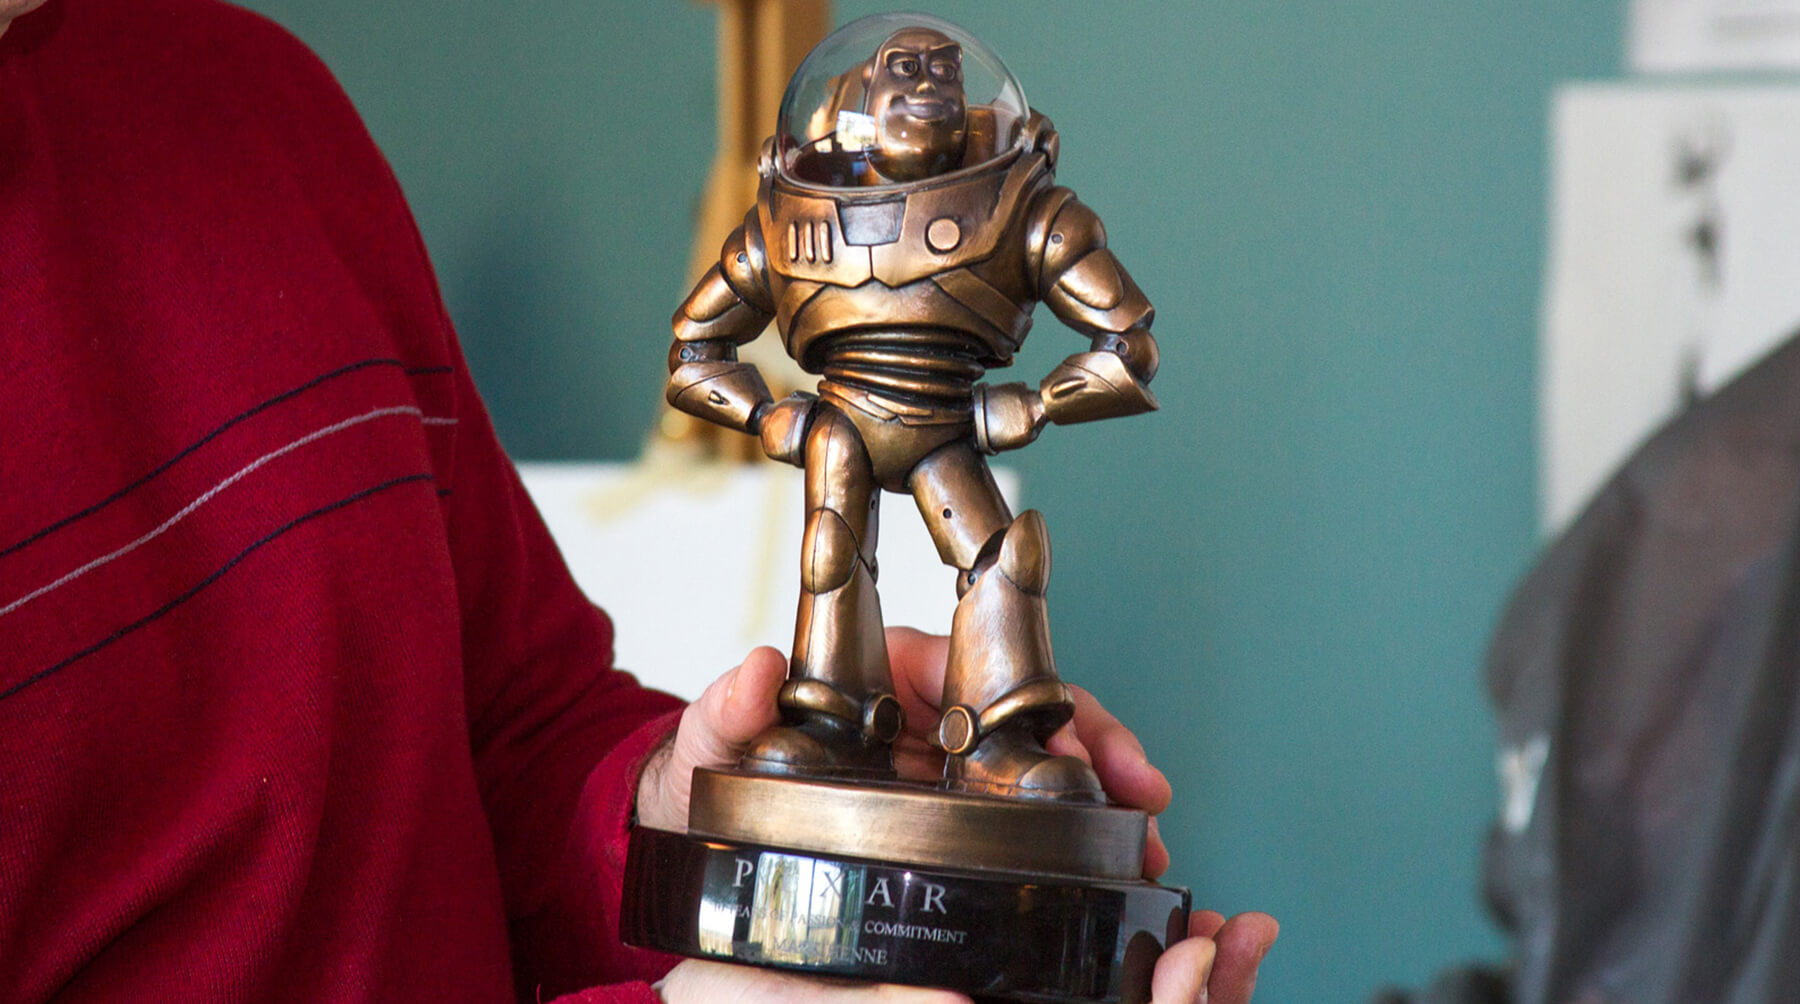 DigiPen Digital Arts lecturer Mark Henne shows his Pixar Award for Passionate Commitment, a bronze Buzz Lightyear trophy